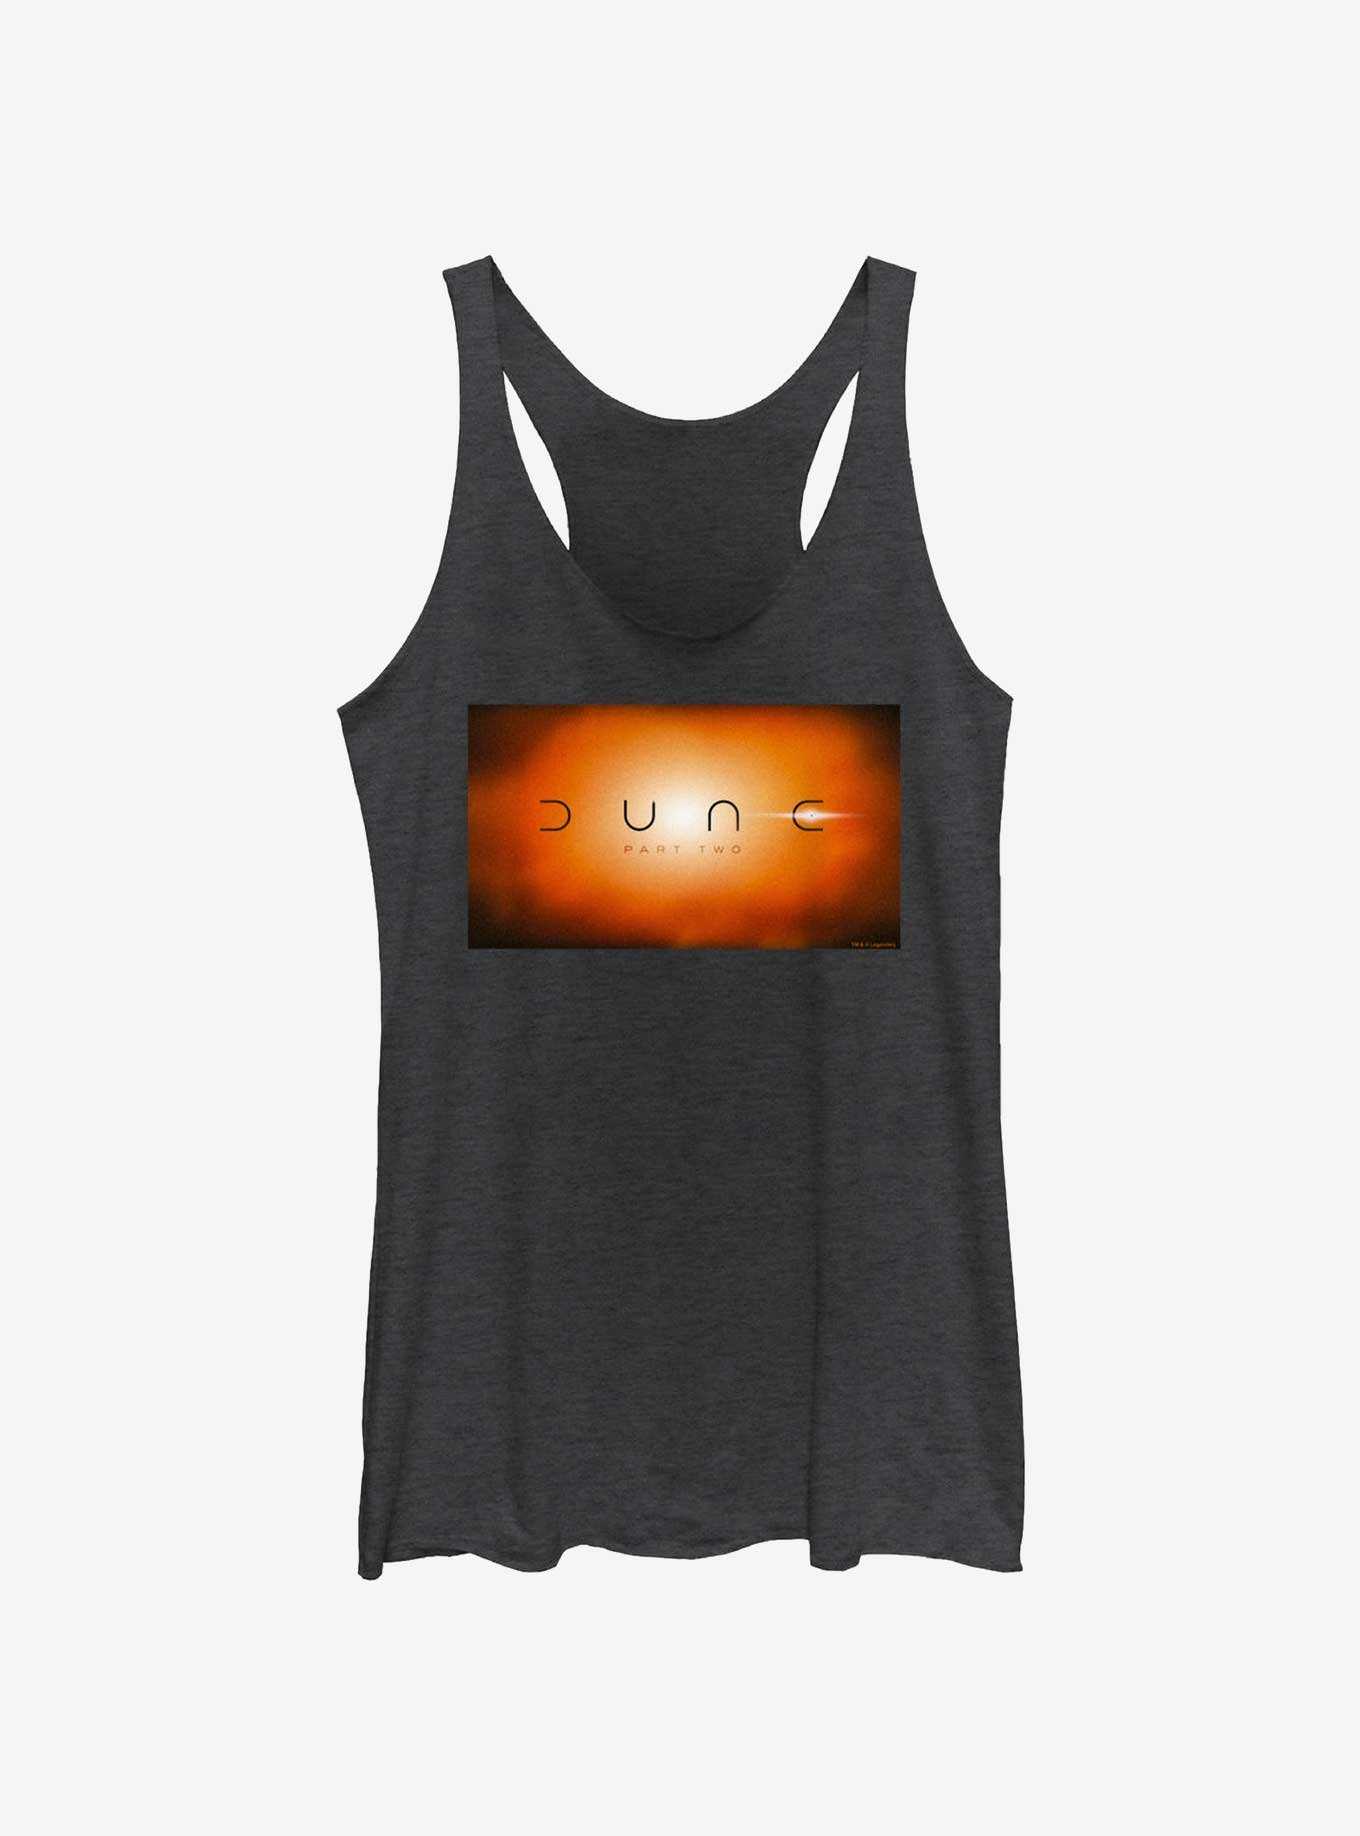 Dune: Part Two Eclipse Womens Tank Top, , hi-res